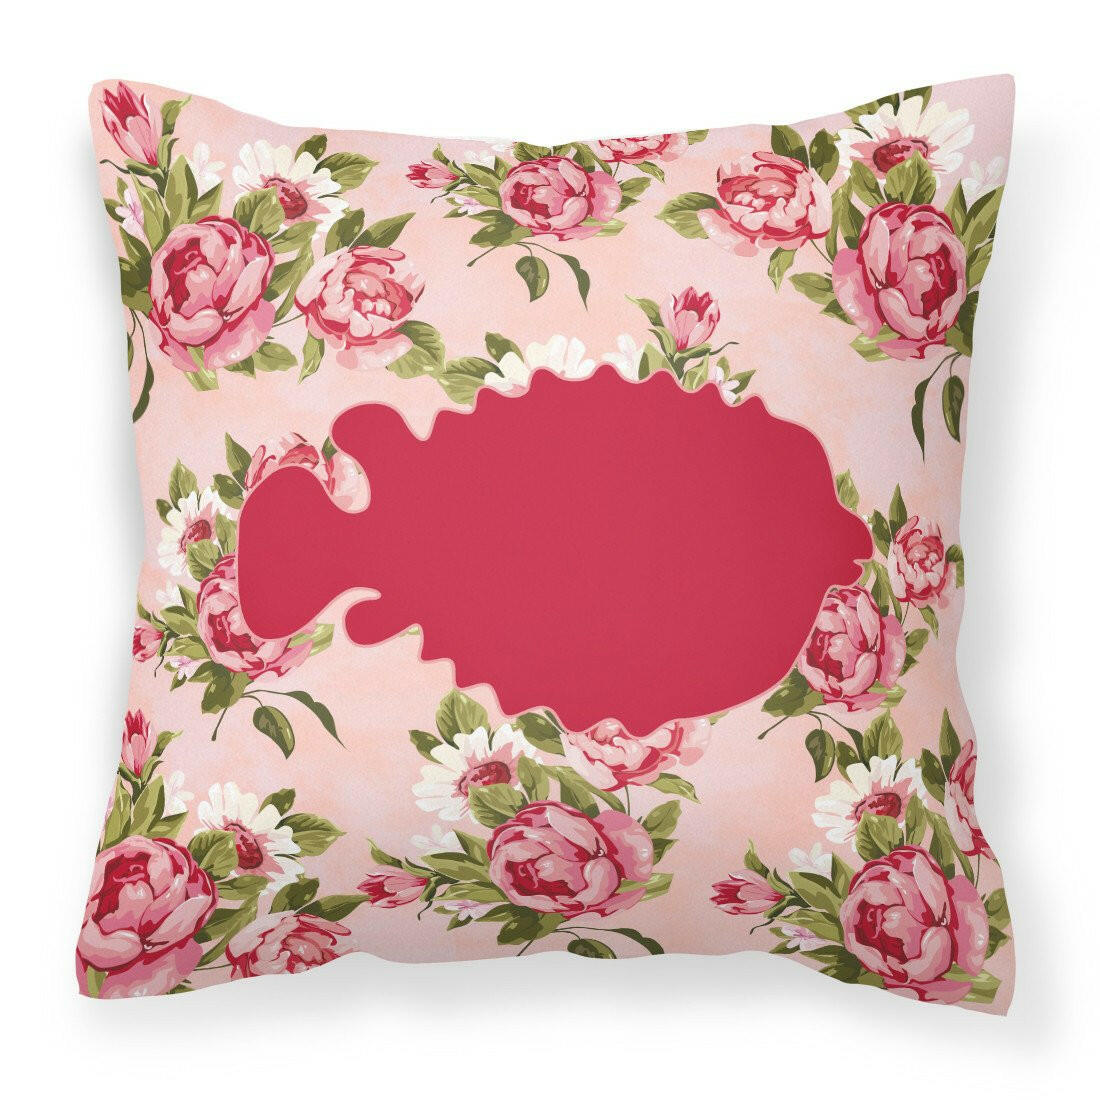 Fish - Blowfish Shabby Chic Pink Roses  Fabric Decorative Pillow BB1016-RS-PK-PW1414 - the-store.com